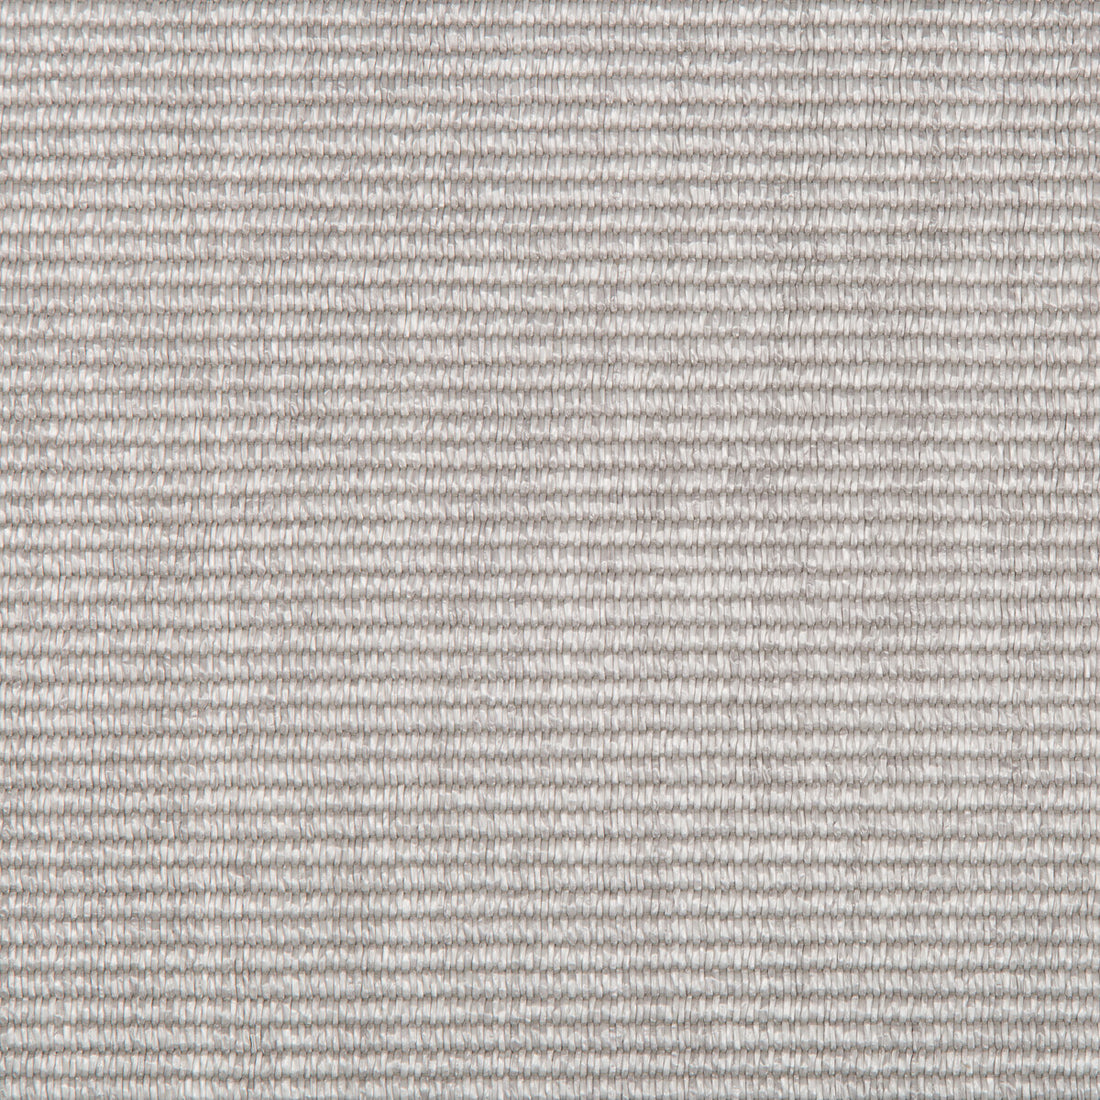 Topanga fabric in gris color - pattern 34952.11.0 - by Kravet Couture in the Sue Firestone Malibu collection